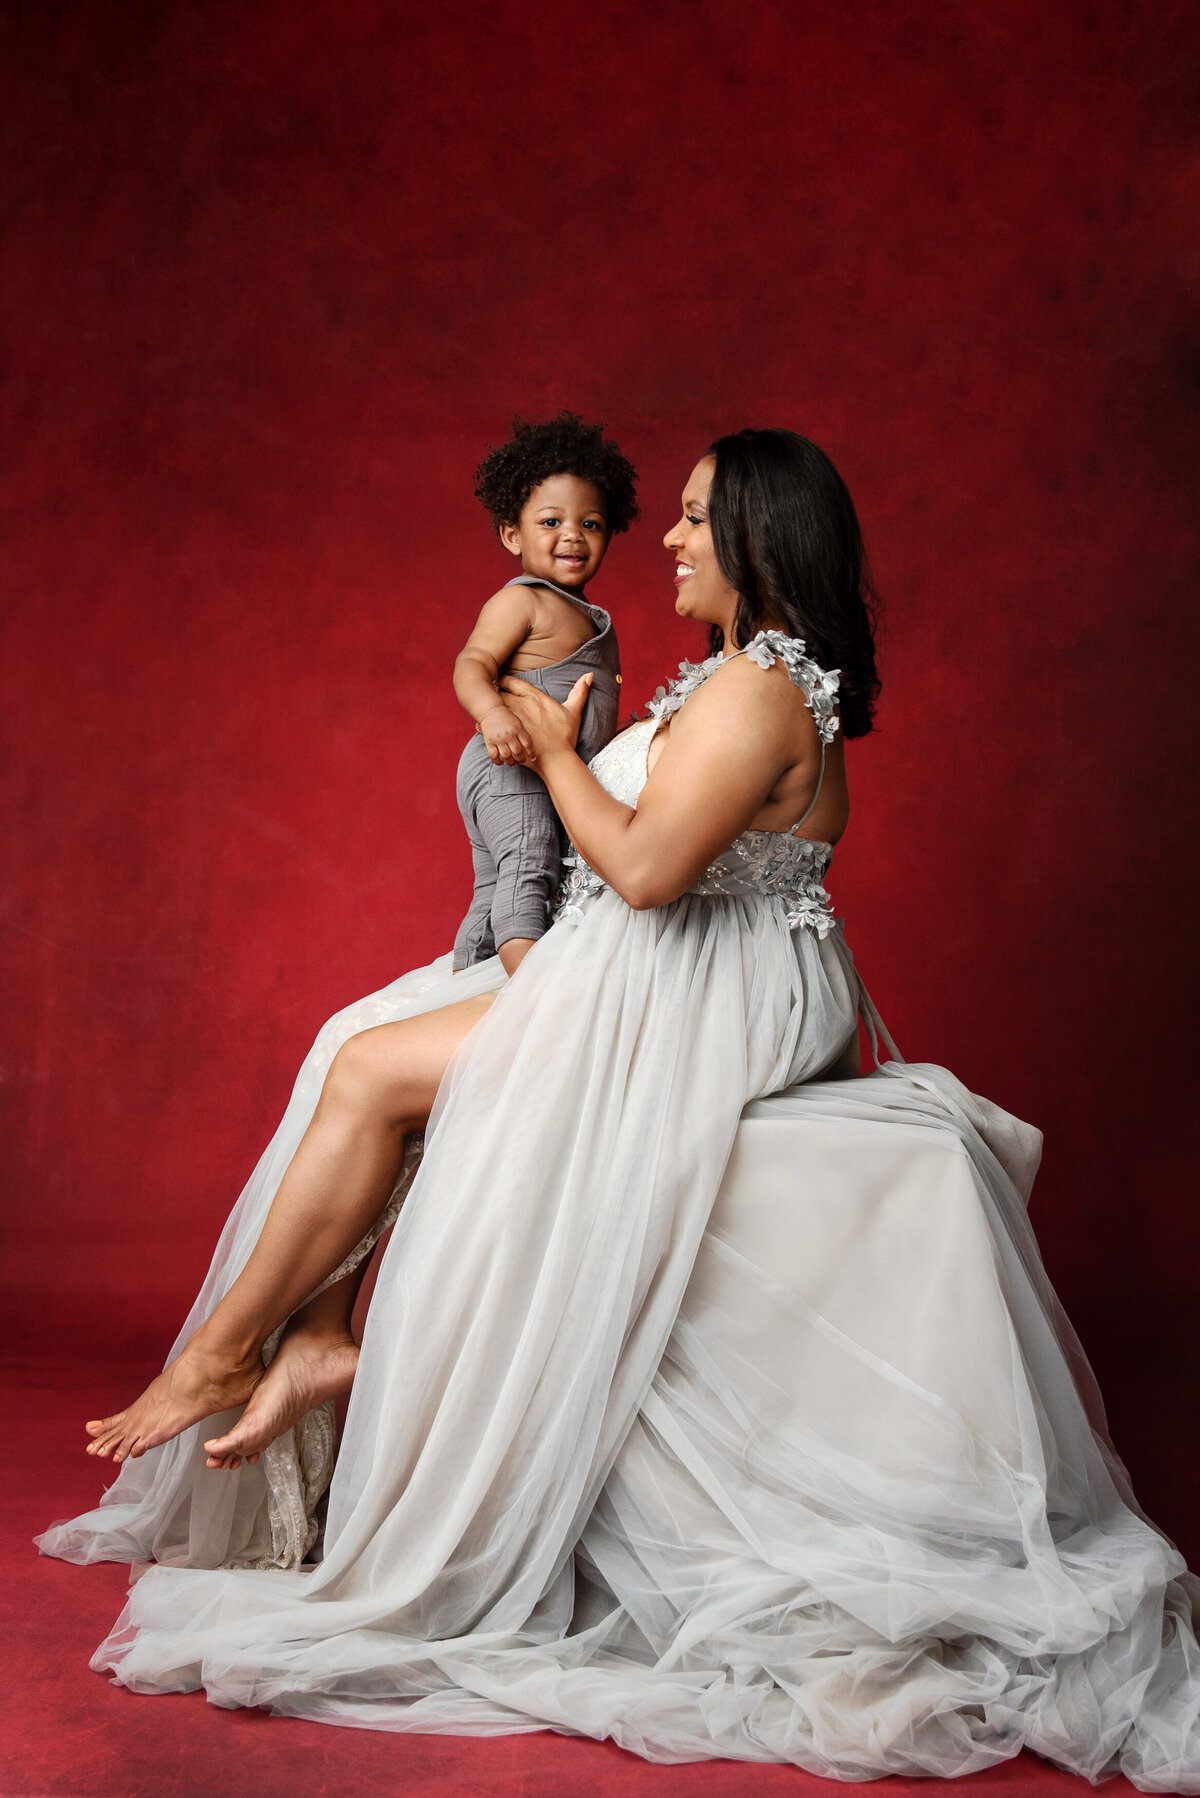 st-louis-family-photographer-mom-in-gray-tulle-gown-sitting-with-holding-todder-boy-on-red-backdrop